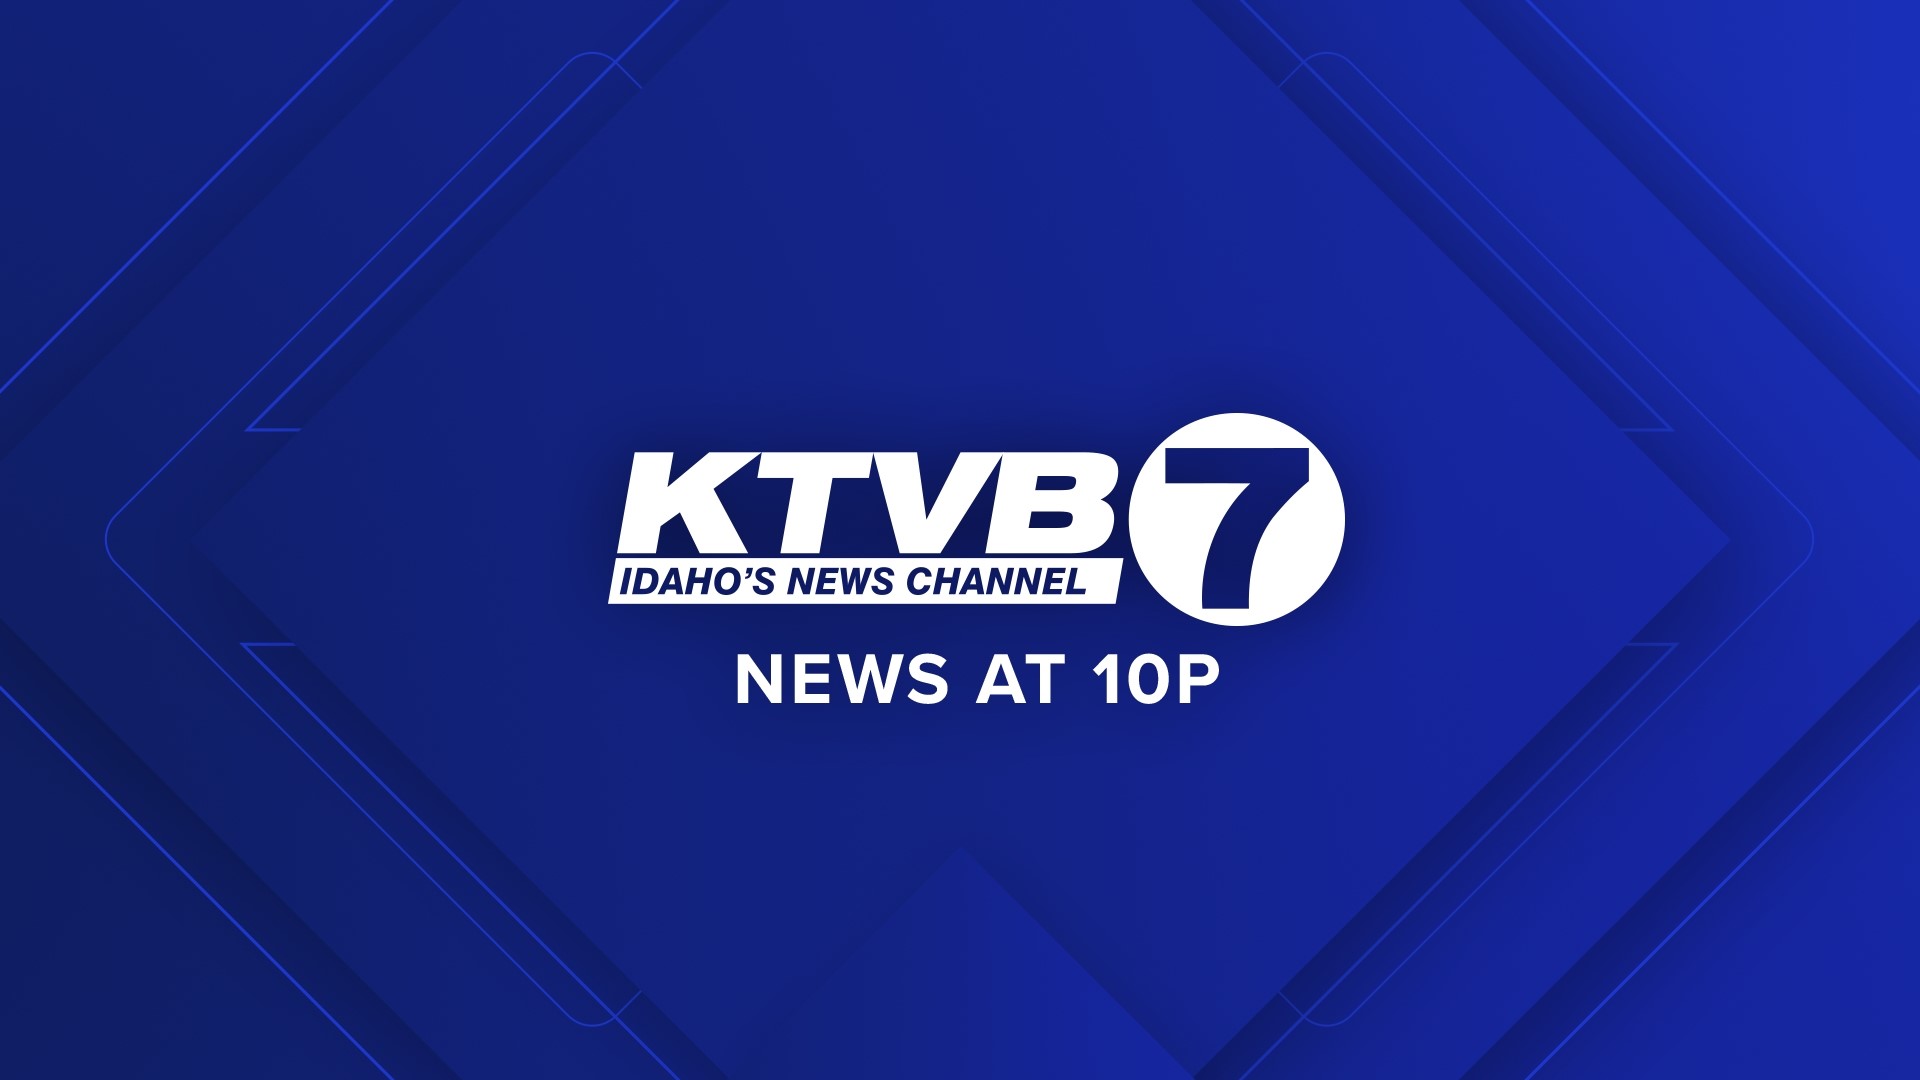 The day's news, weather and sports from the award-winning team at KTVB Idaho's Newschannel 7.